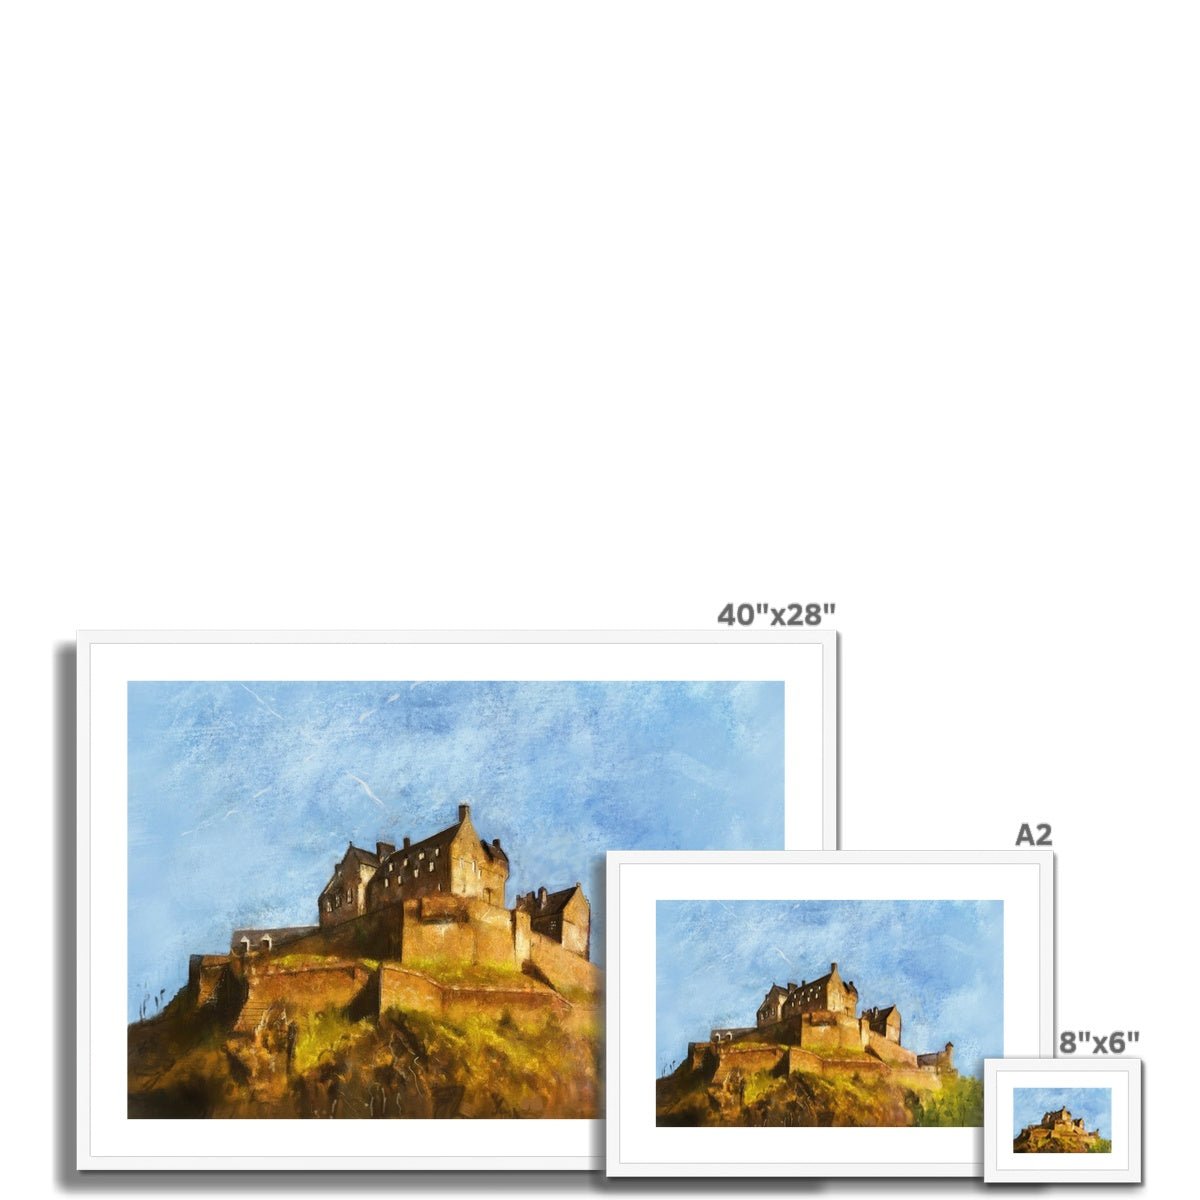 Edinburgh Castle Painting | Framed & Mounted Prints From Scotland-Framed & Mounted Prints-Historic & Iconic Scotland Art Gallery-Paintings, Prints, Homeware, Art Gifts From Scotland By Scottish Artist Kevin Hunter